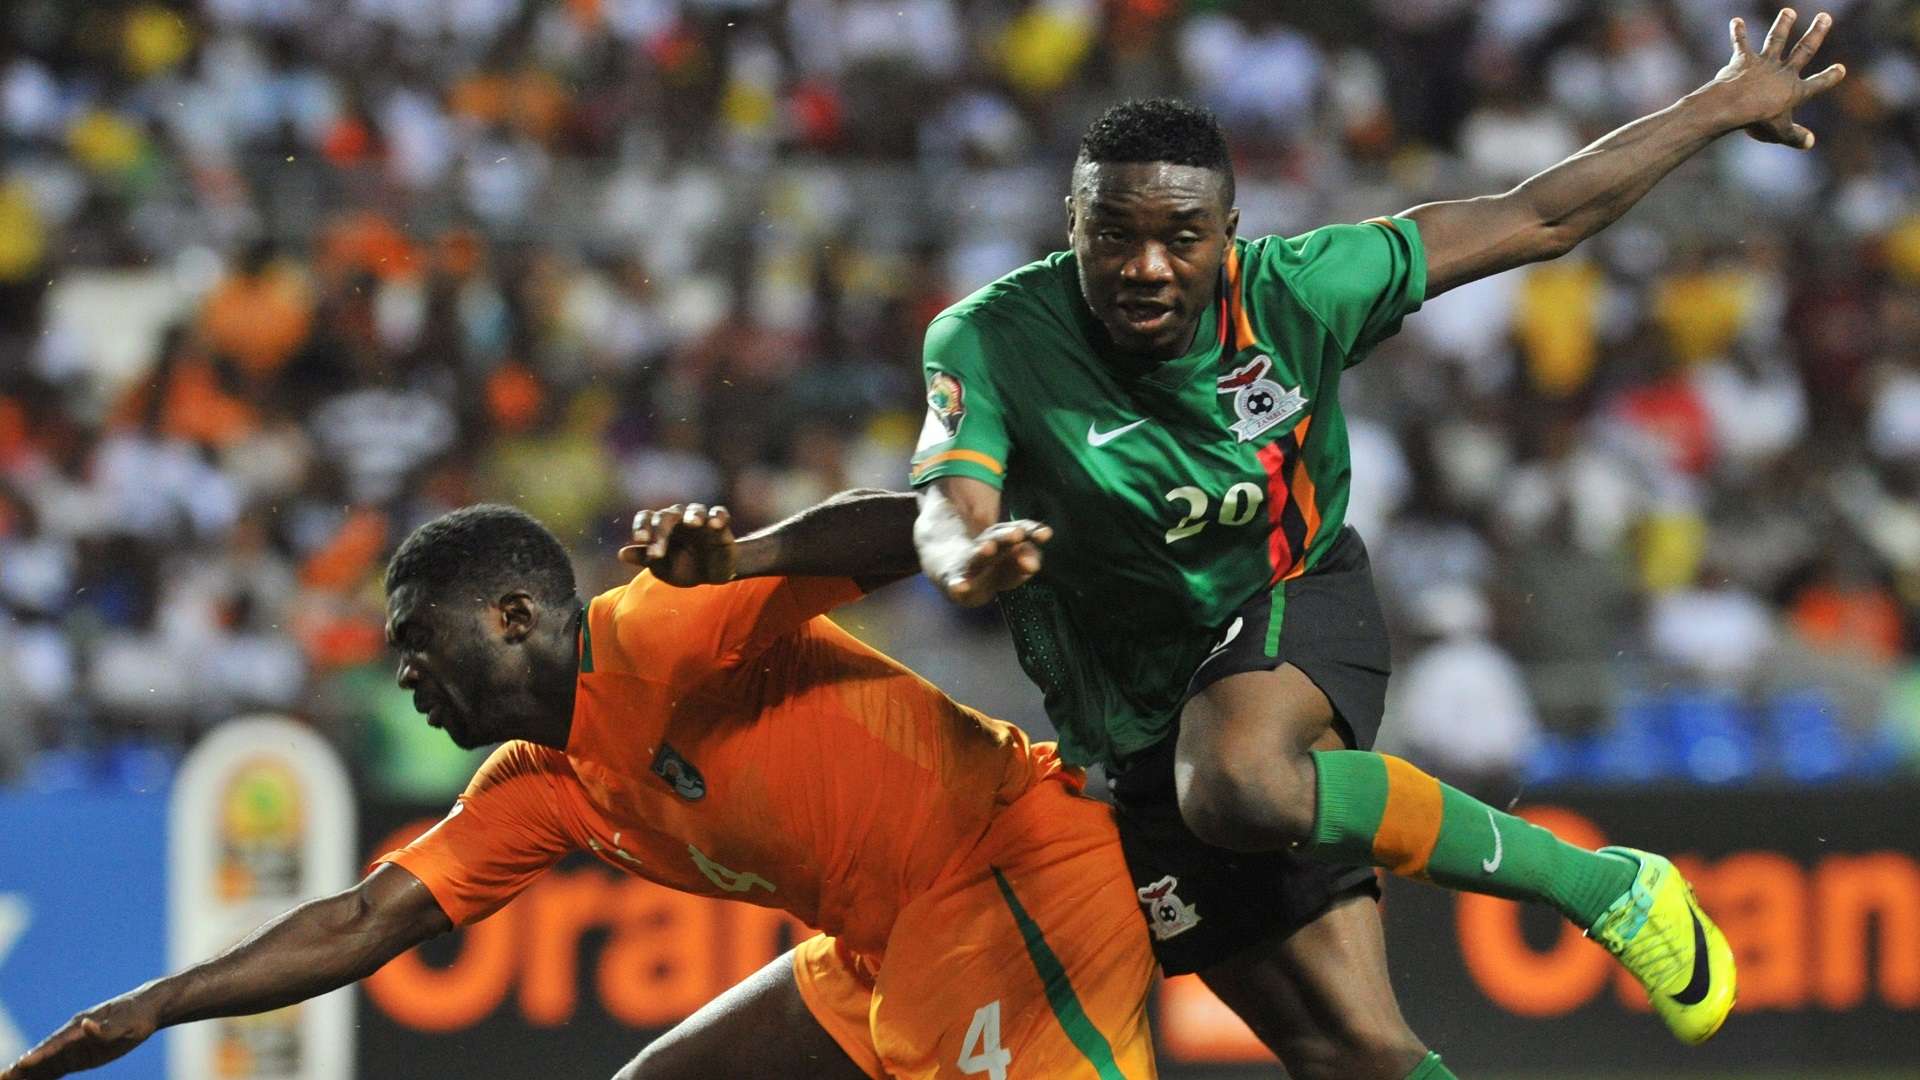 Ivory Coast's national football team defender Abib Kolo Toure (L) vies for the ball with Zambian Emmanuel Mayuka during the 2012 Africa Cup of Nations final